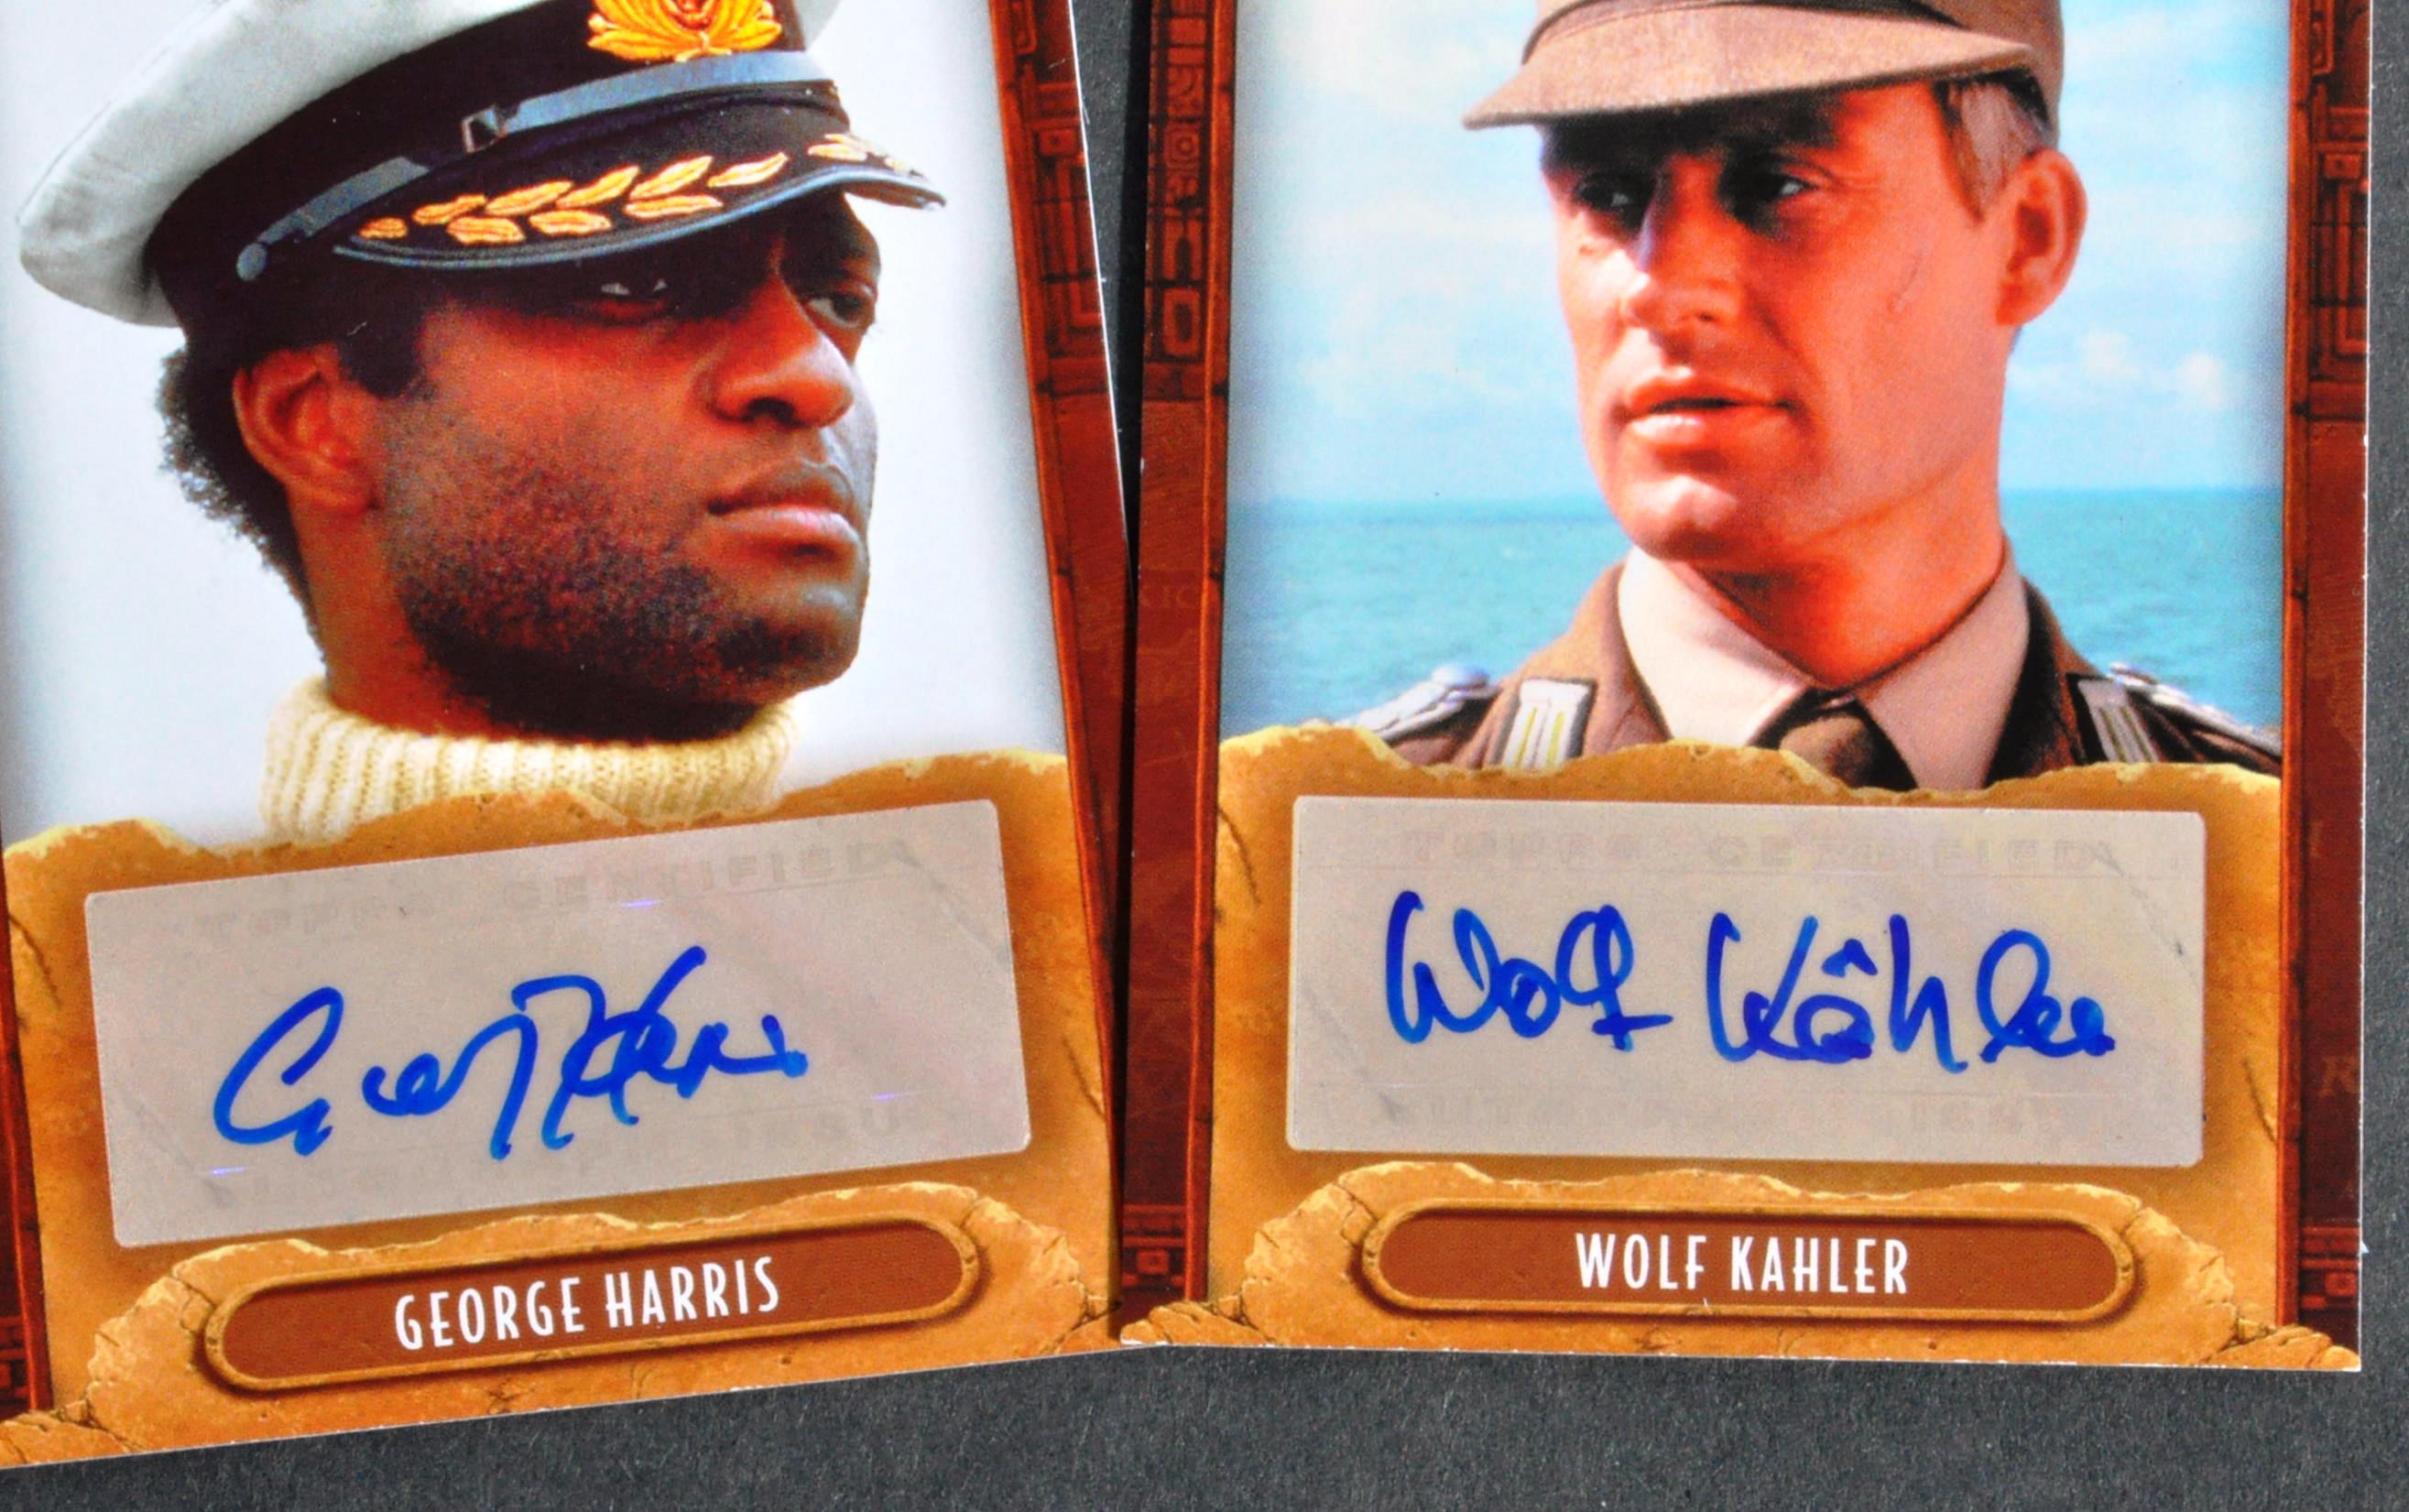 INDIANA JONES - TOPPS - COLLECTION OF OFFICIAL AUTOGRAPH TRADING CARDS - Image 3 of 4